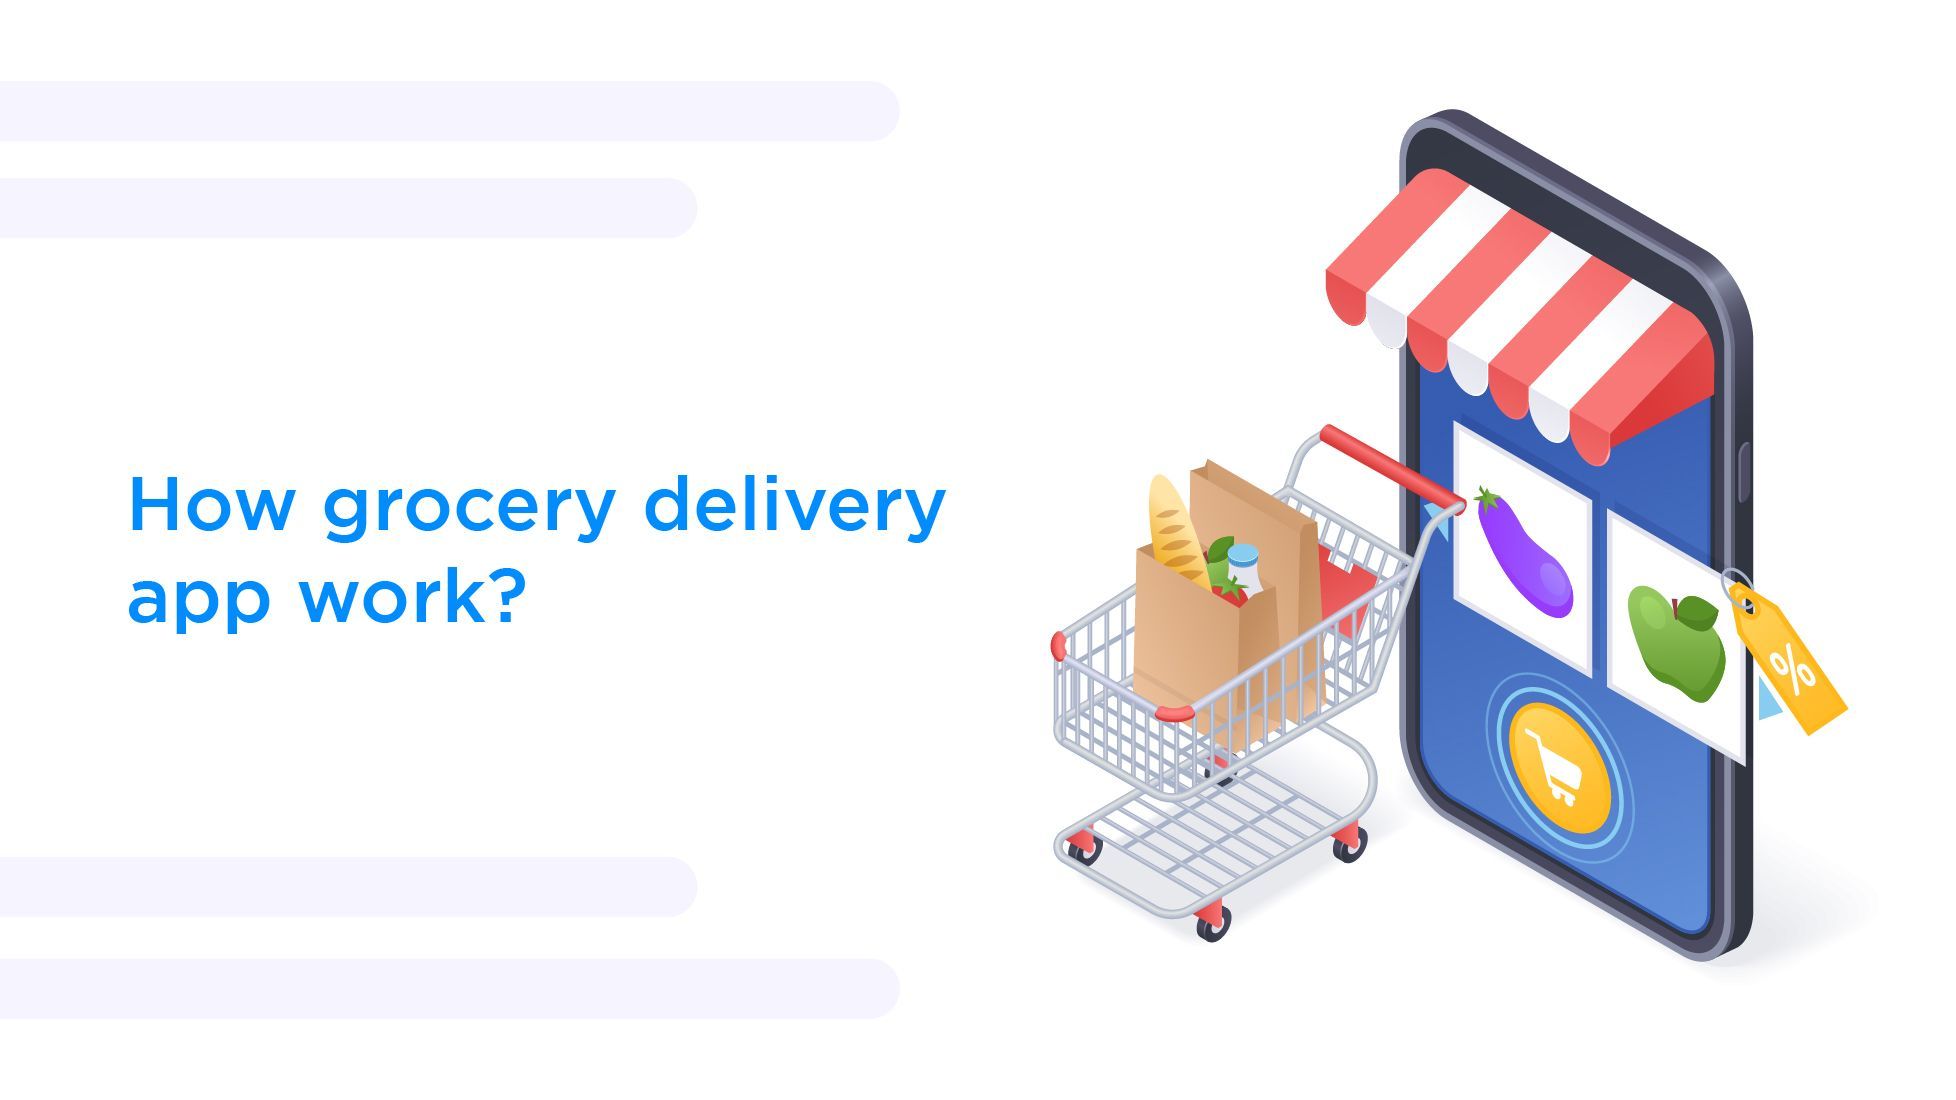 How does a grocery delivery app work?